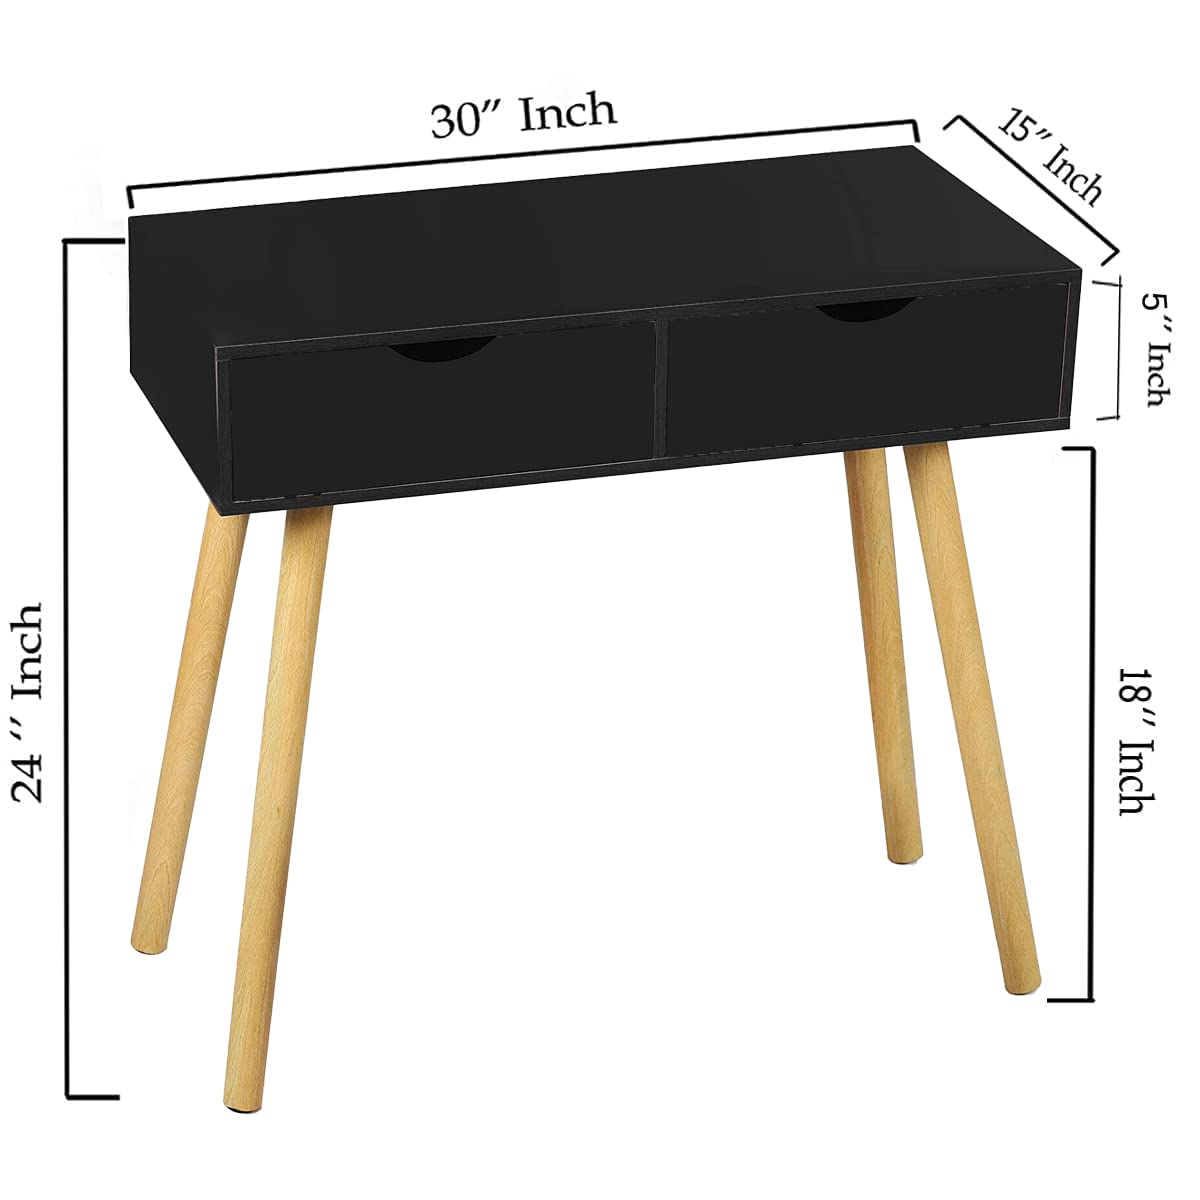 Console Table Side Table for Bedroom, Living Room with Storage Drawer and Legs, Office Table Desk, Bedside Table, End Table, Study Table Dime Store